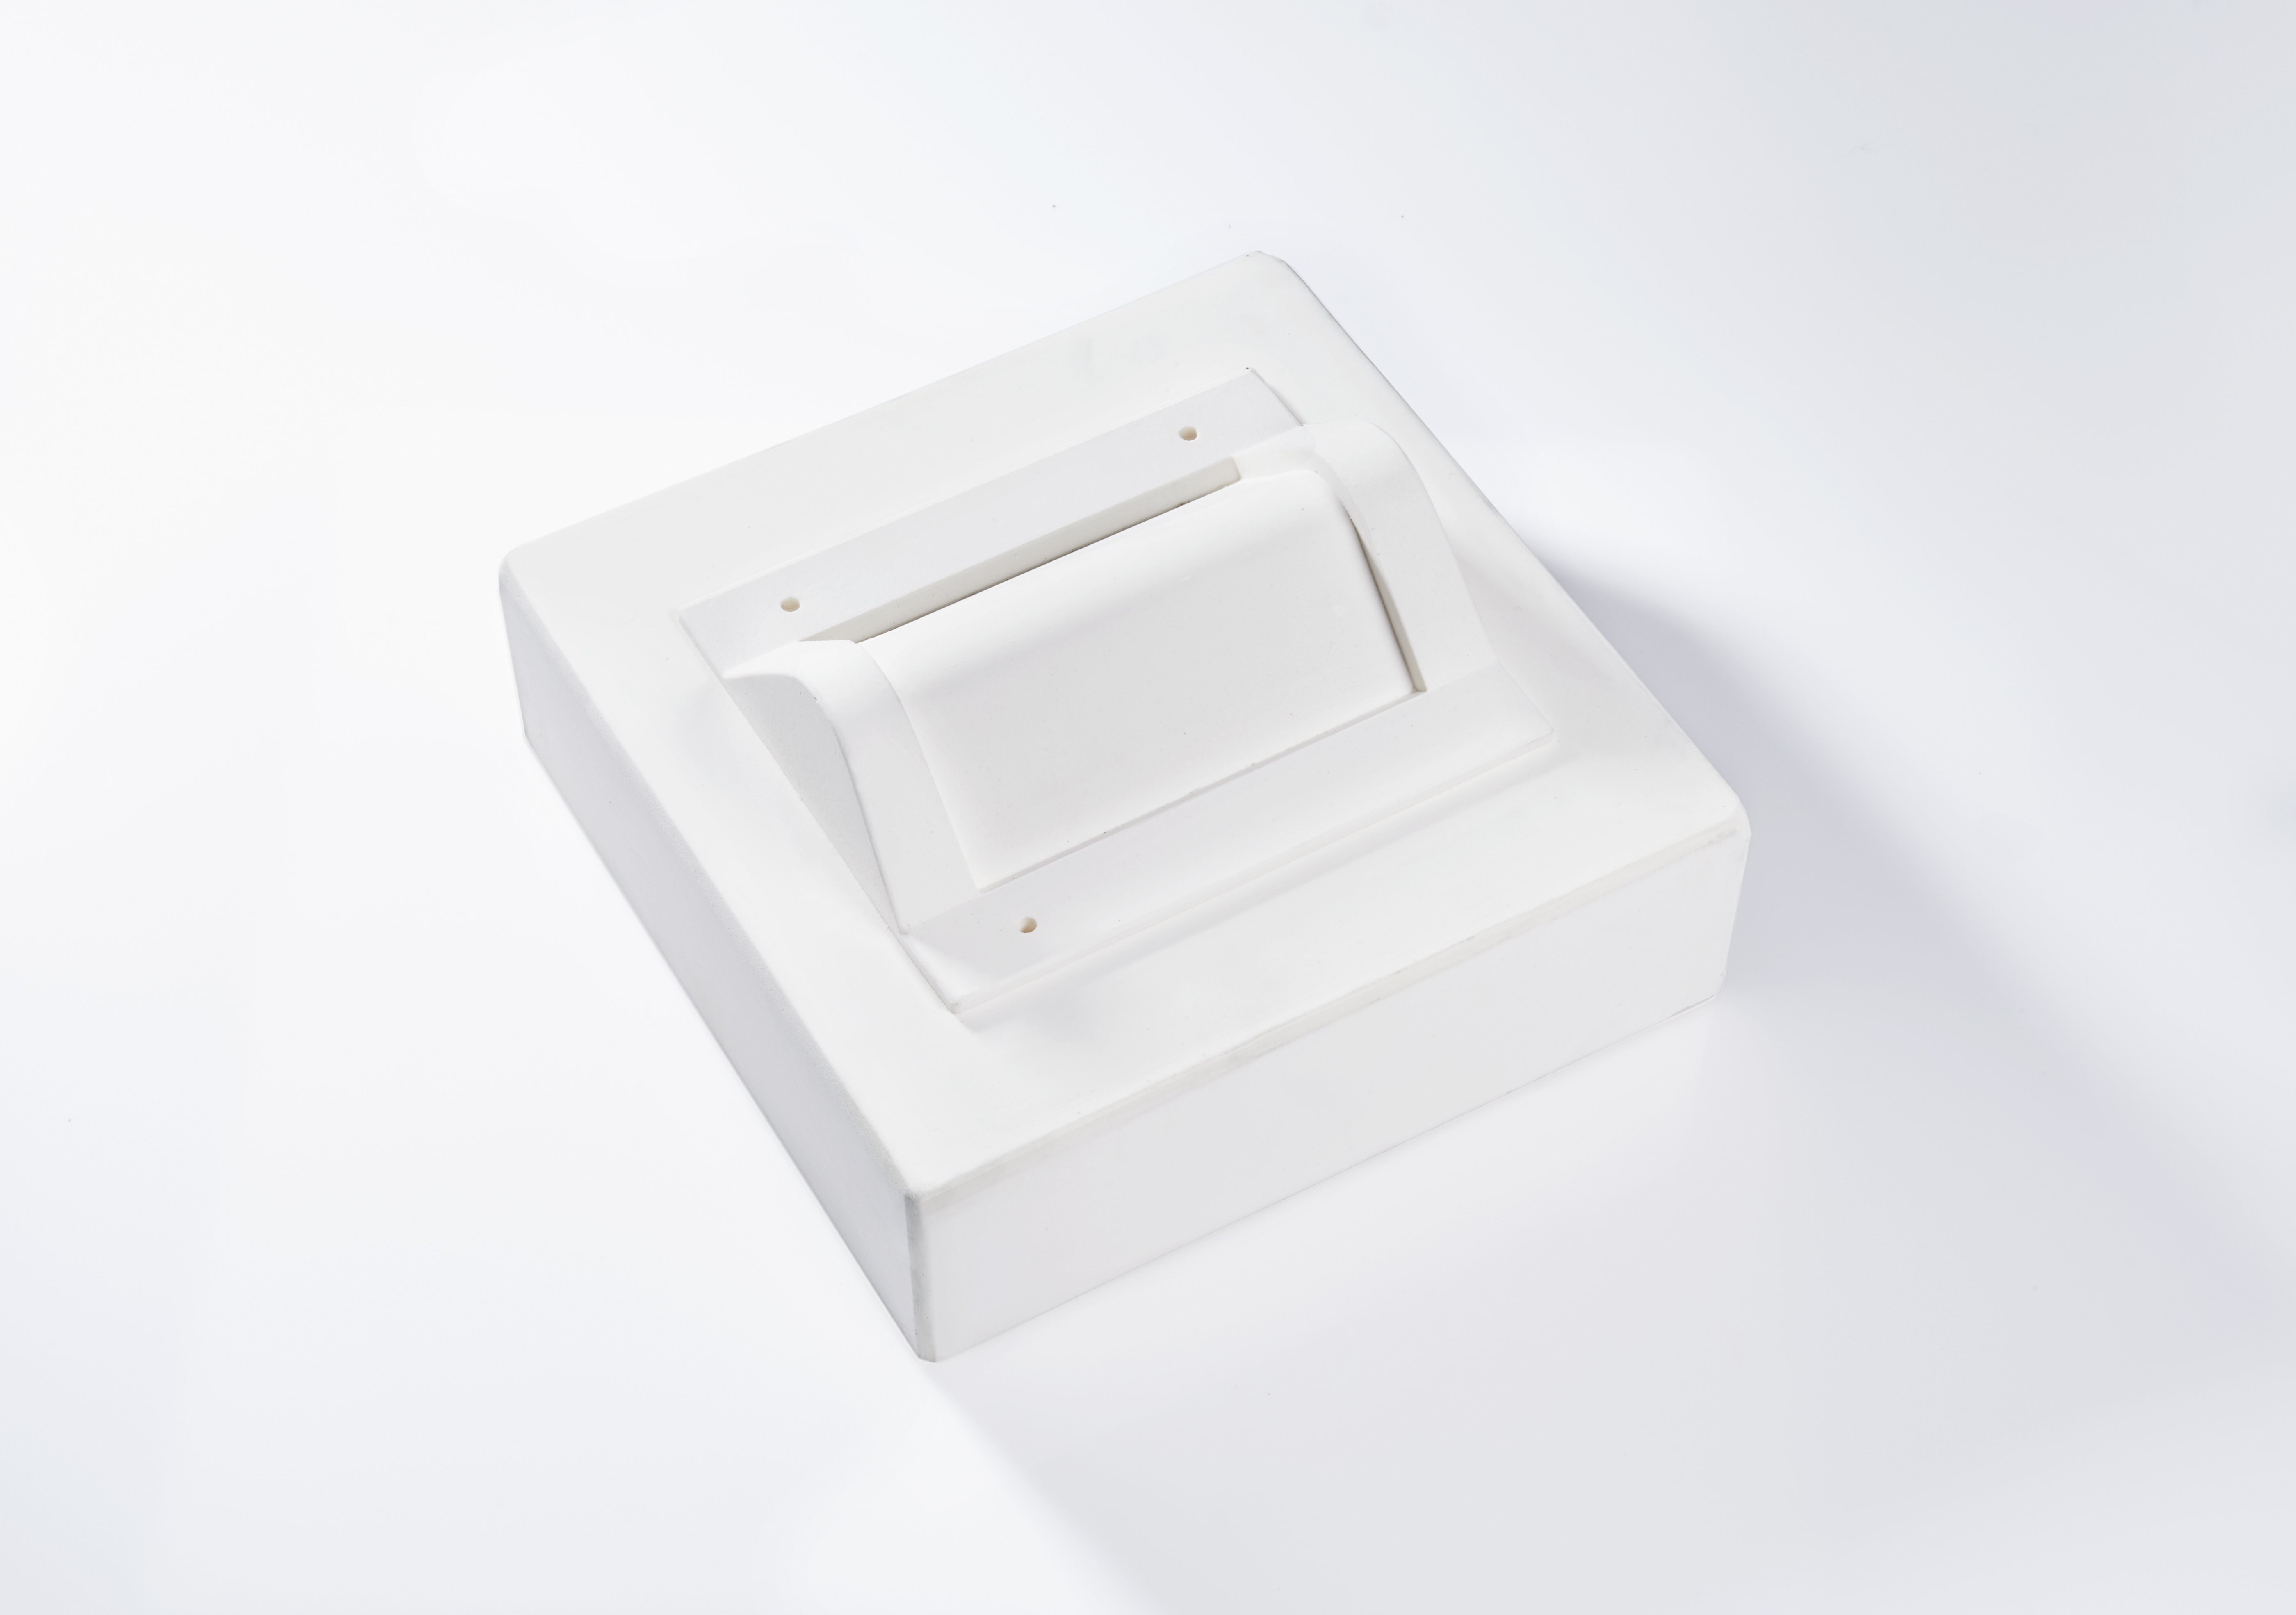 Product announcement: Casting resin system for the ceramics industry "ALWA MOULD P"